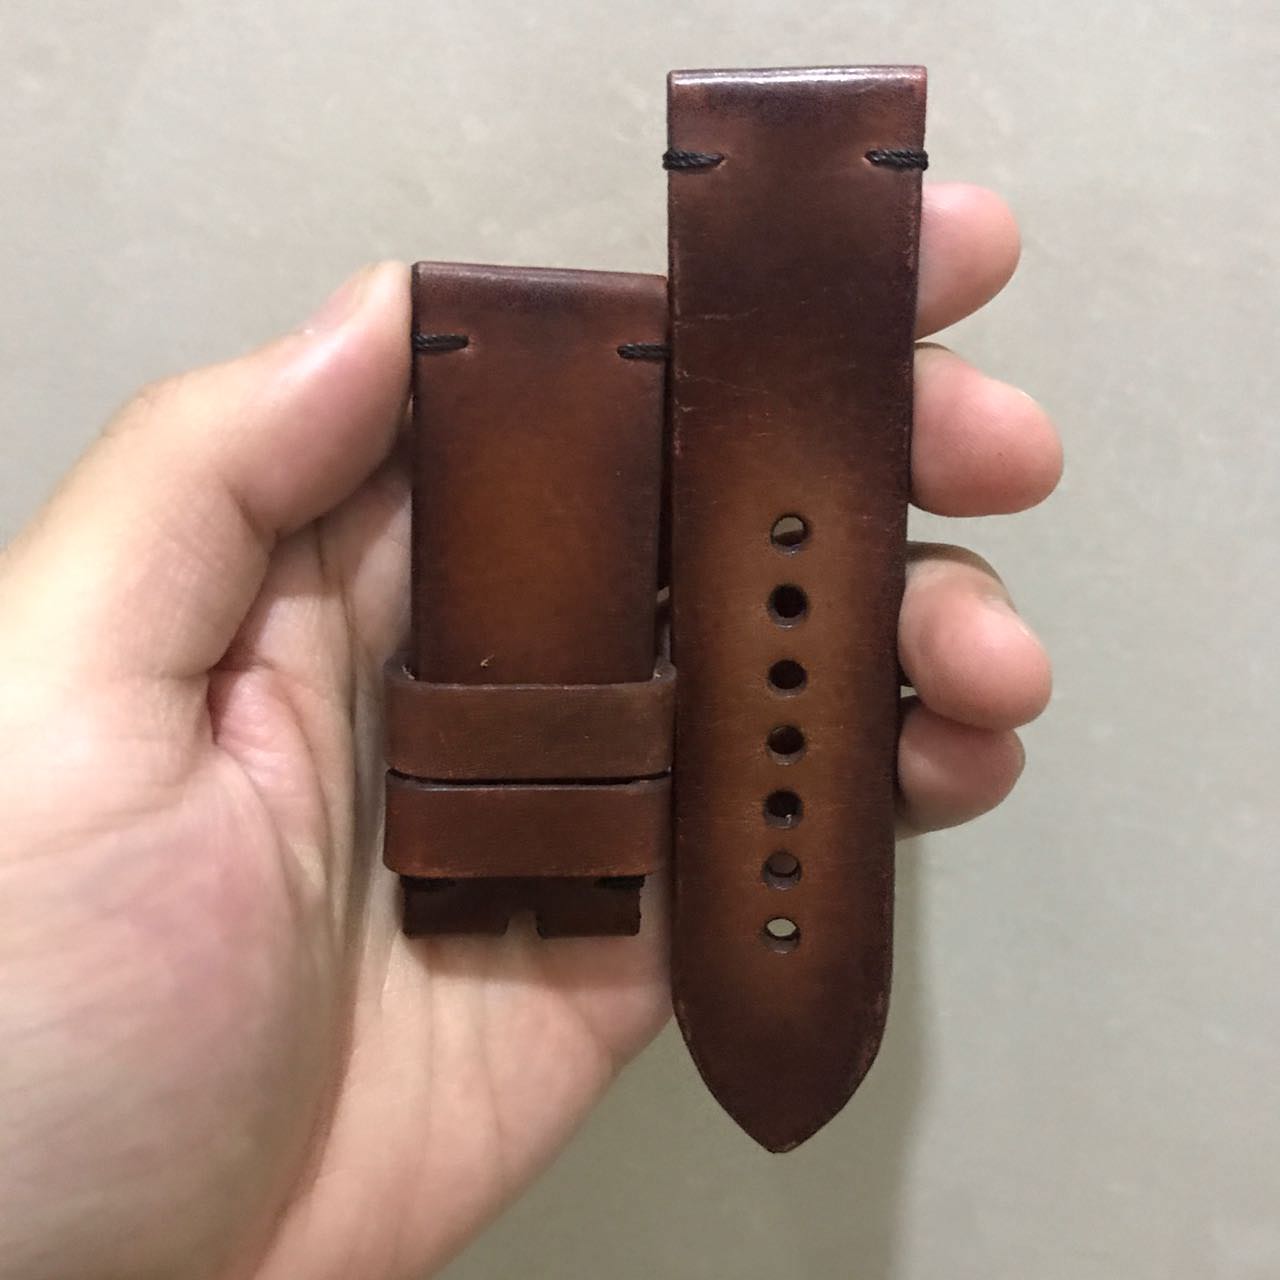 all-about-strap-jam-tangan